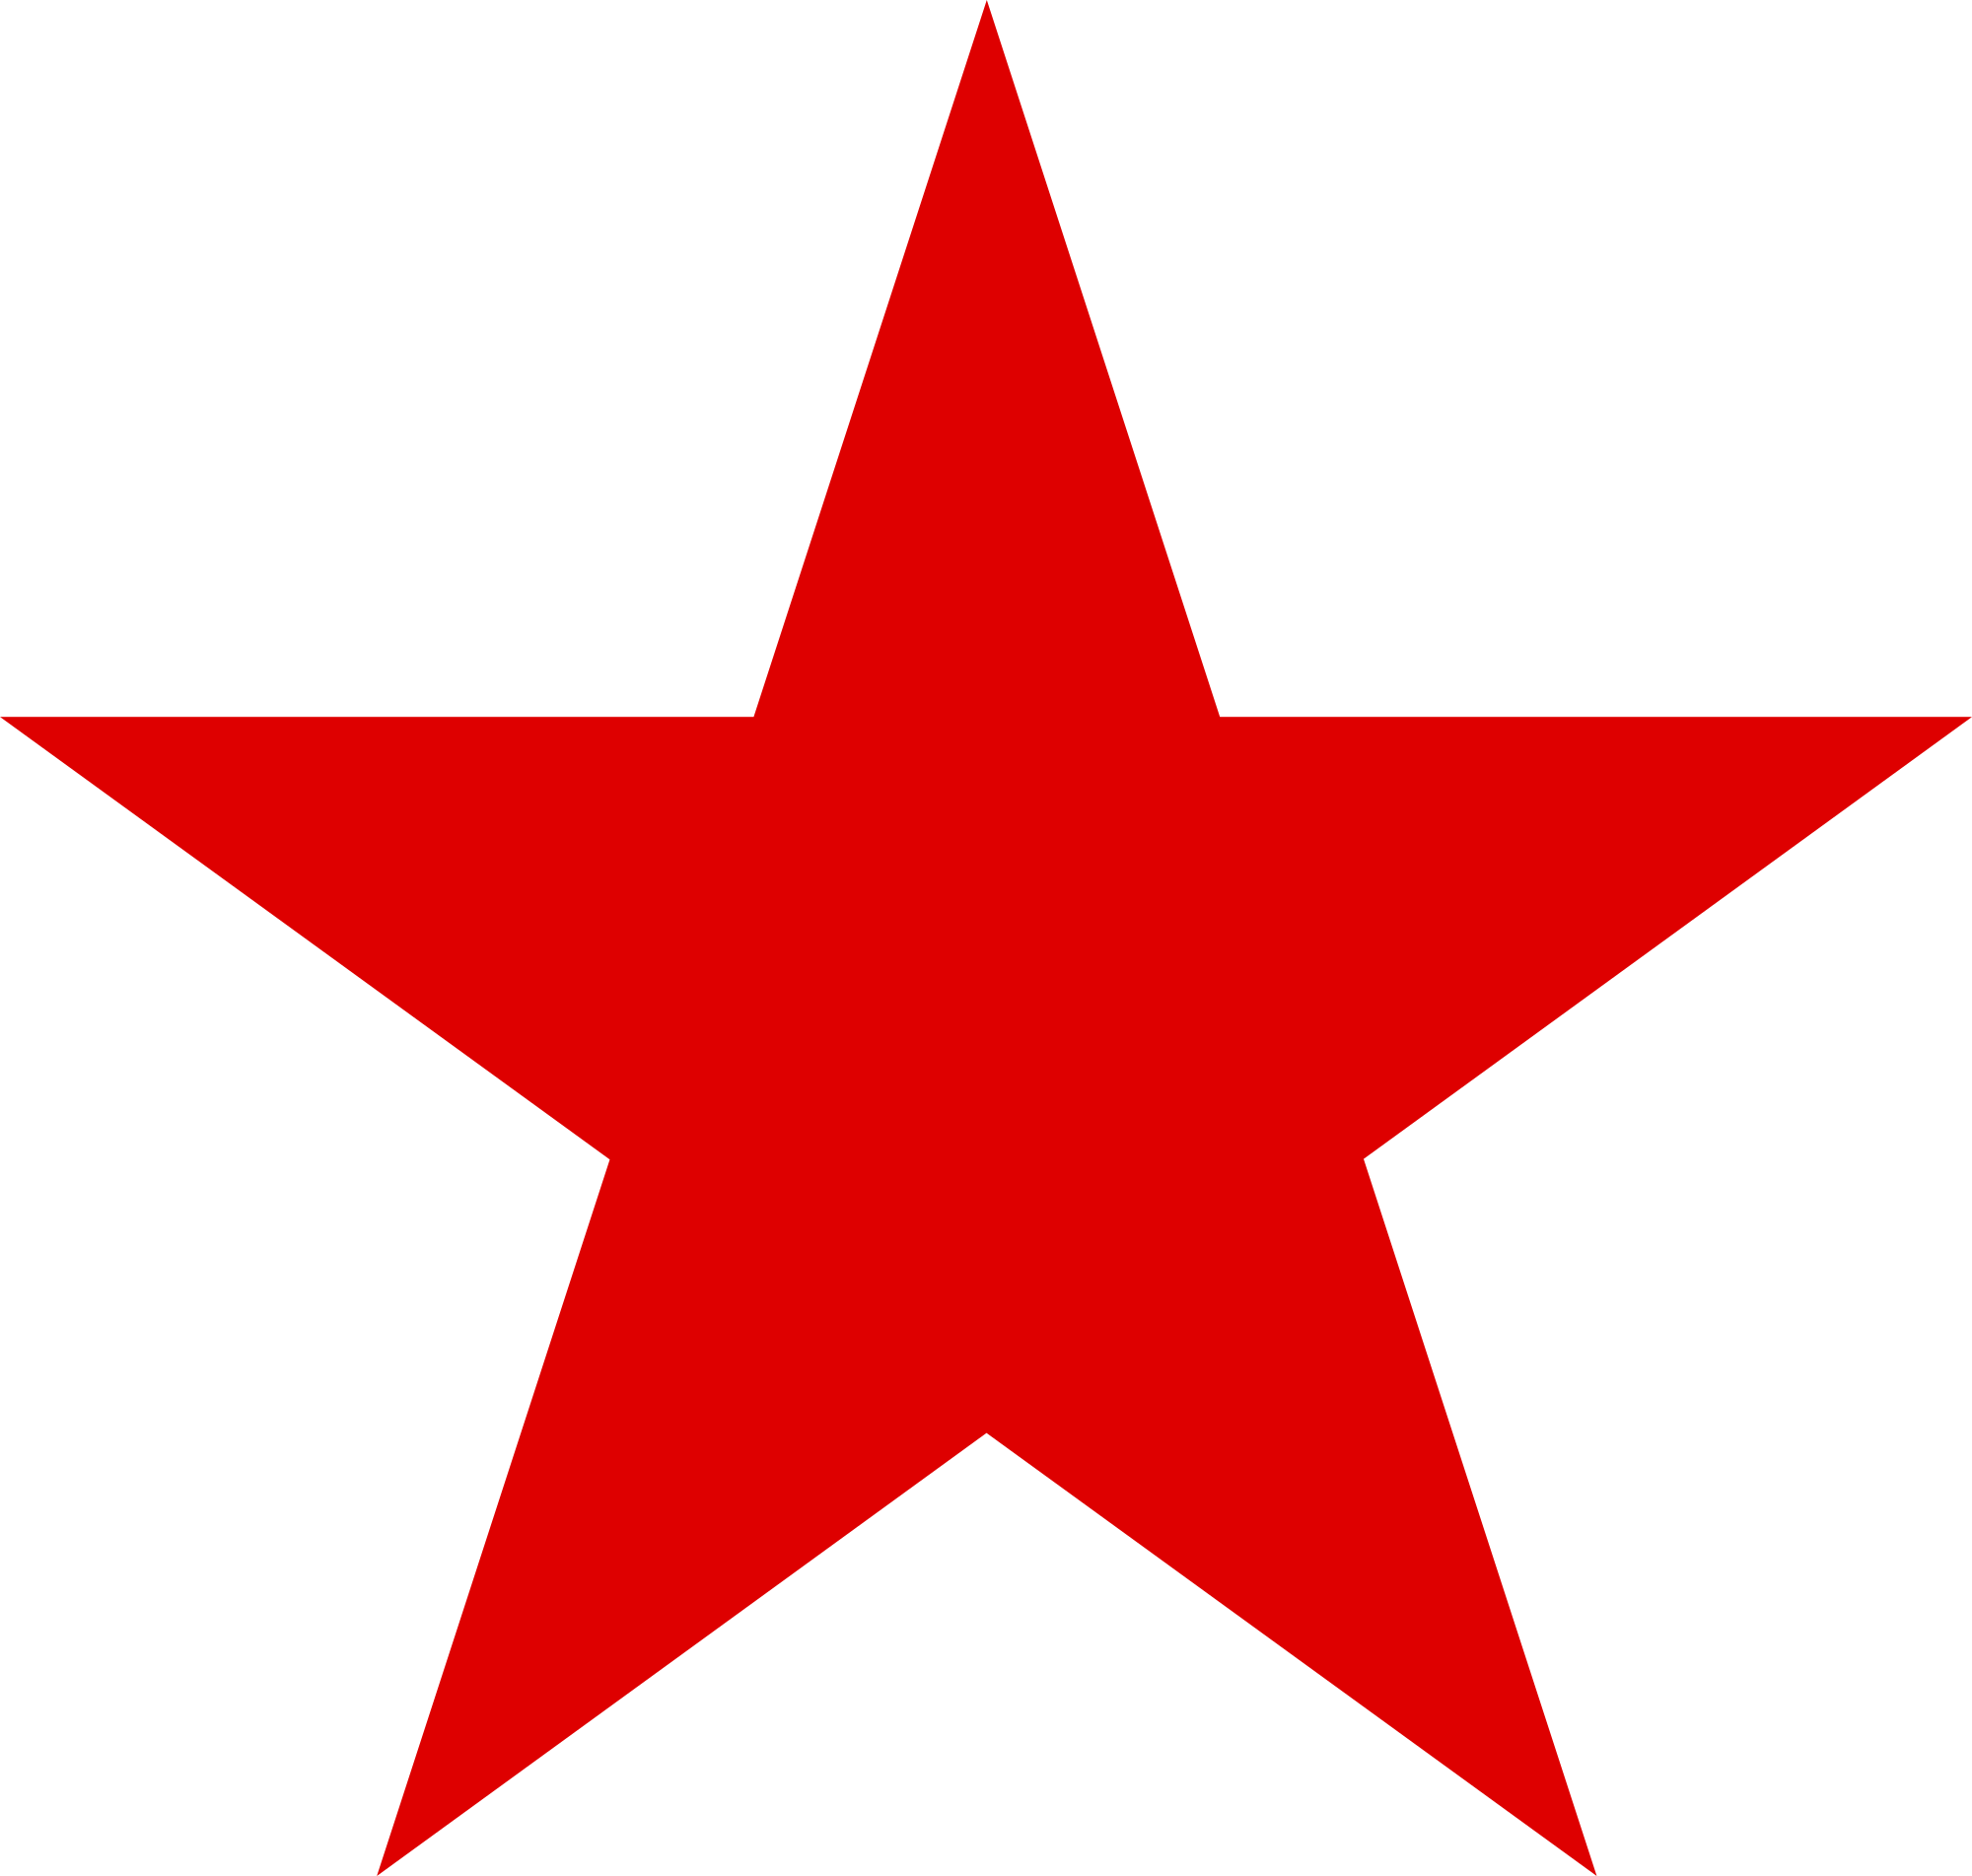 Red 3 Pointed Star Logo - Red star